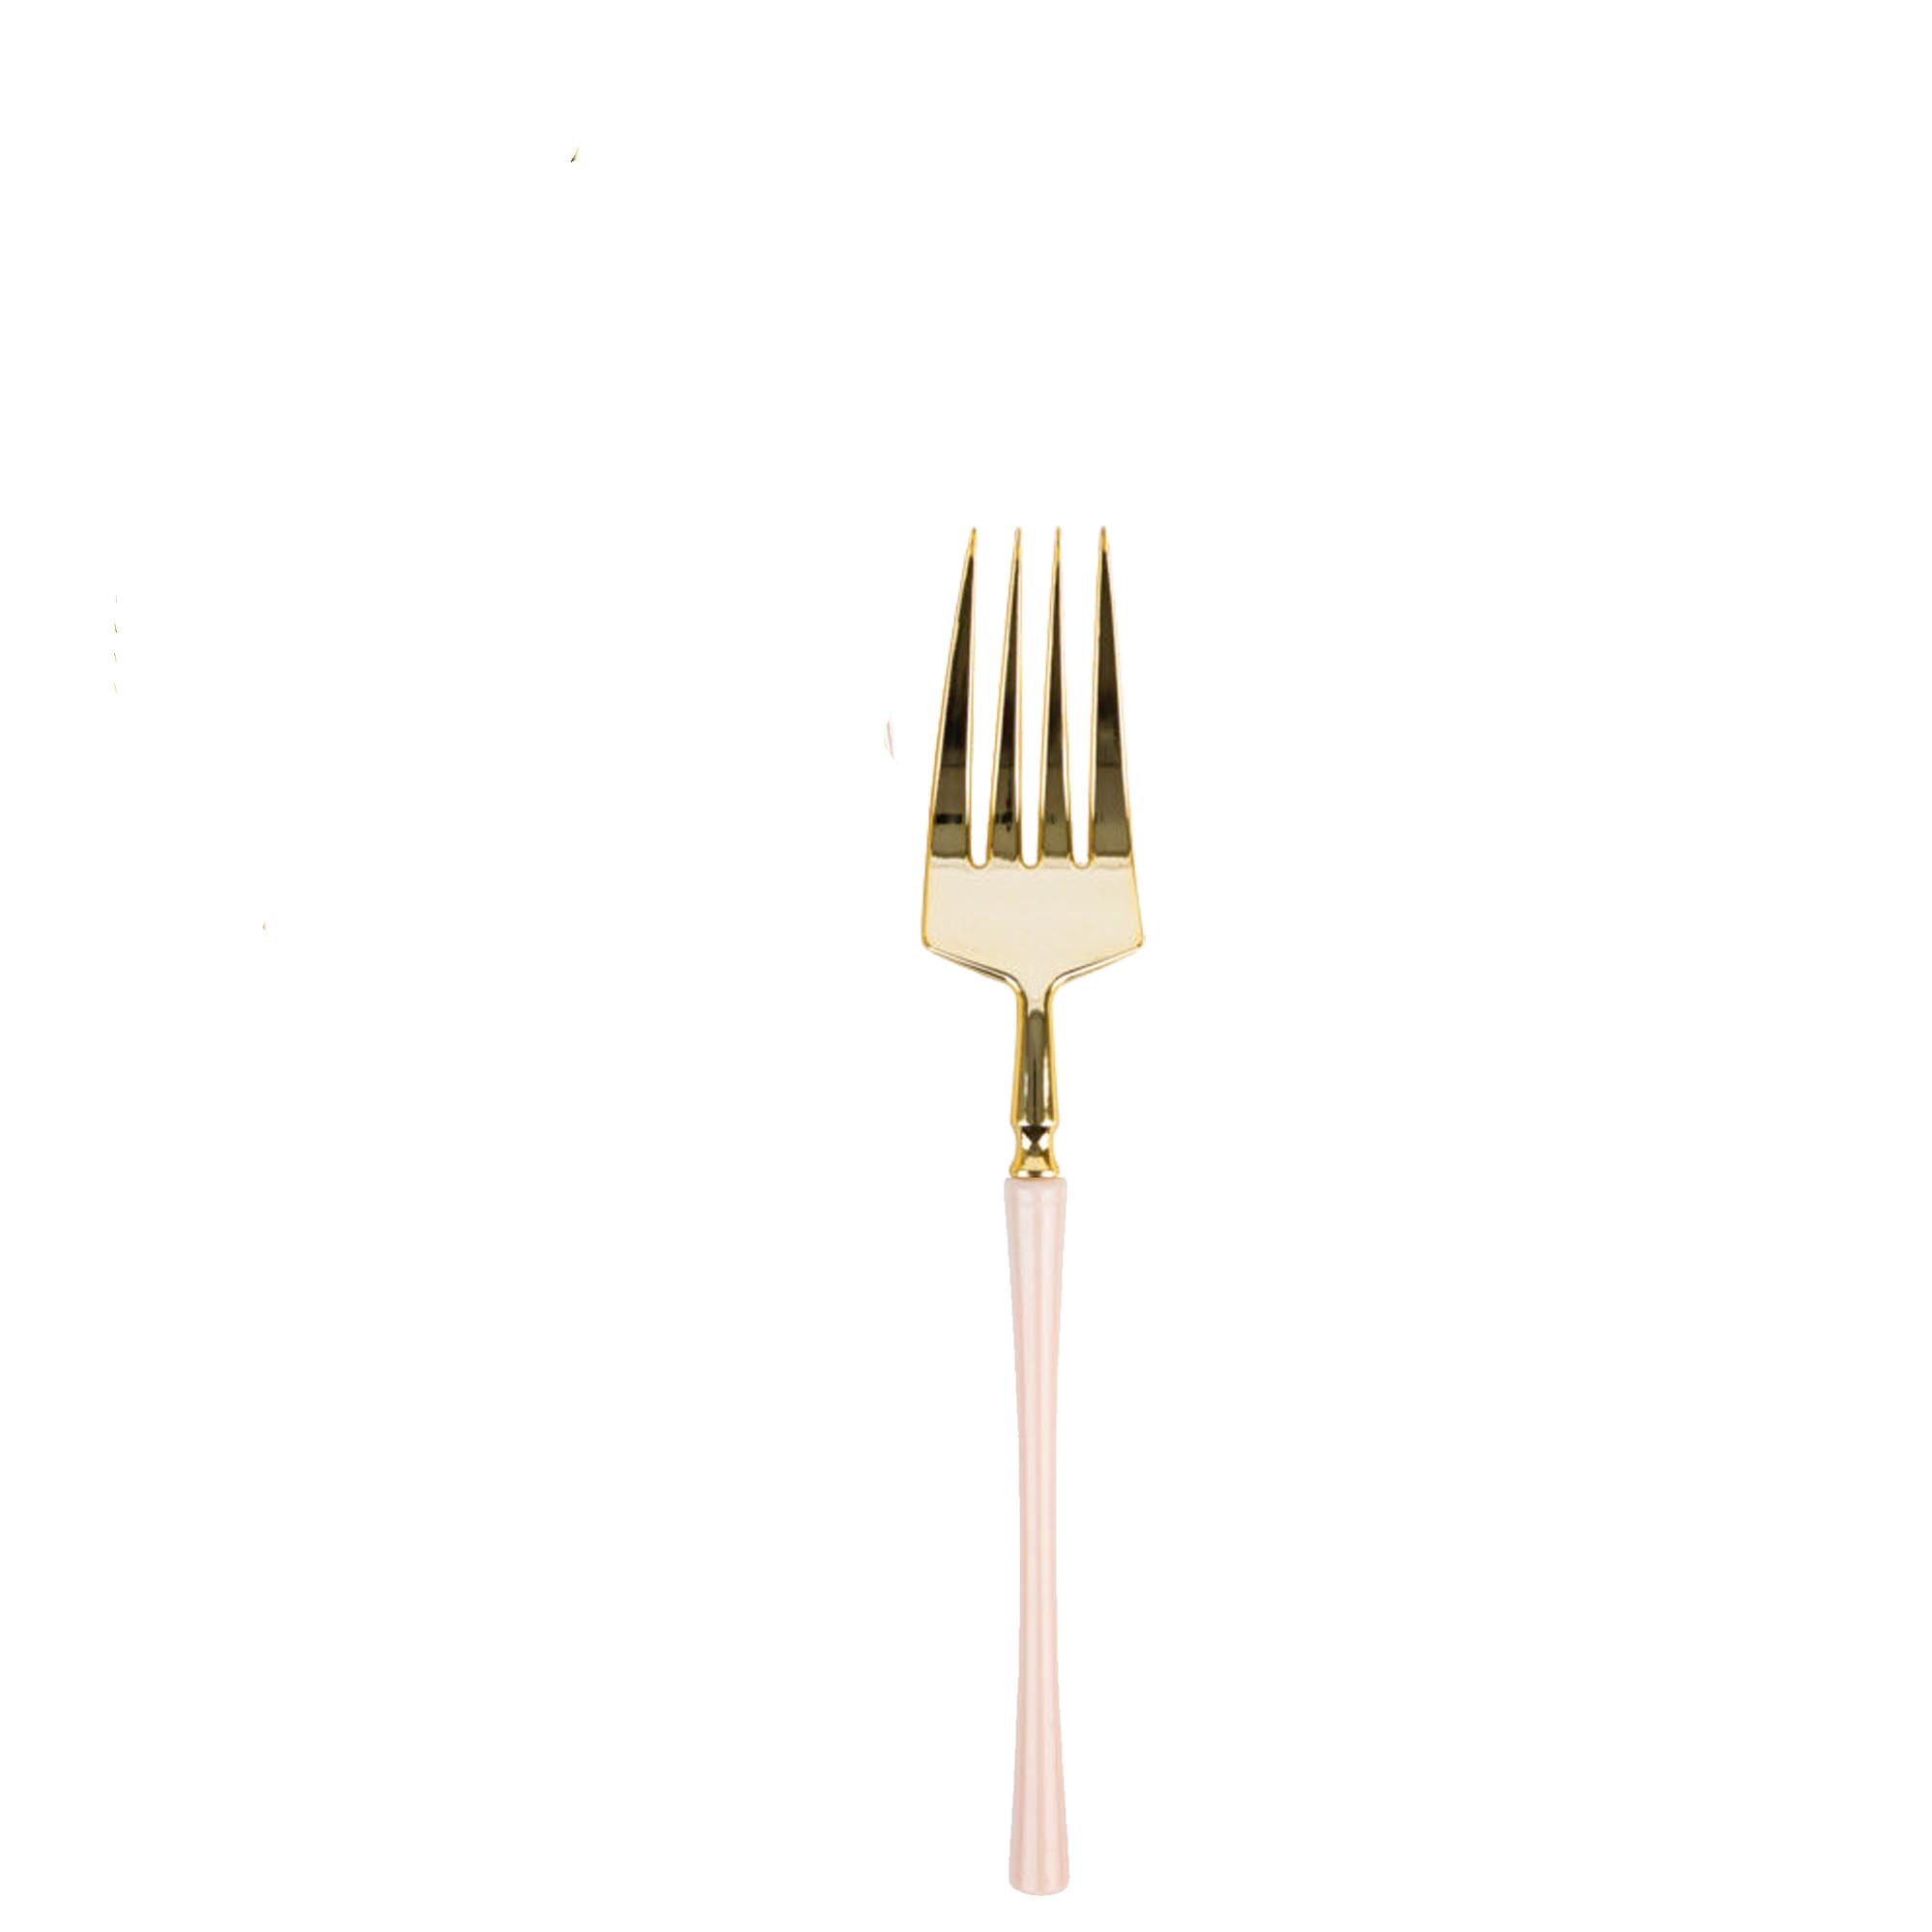 Plastic Salad Forks Pink and Gold Infinity Flatware Collection